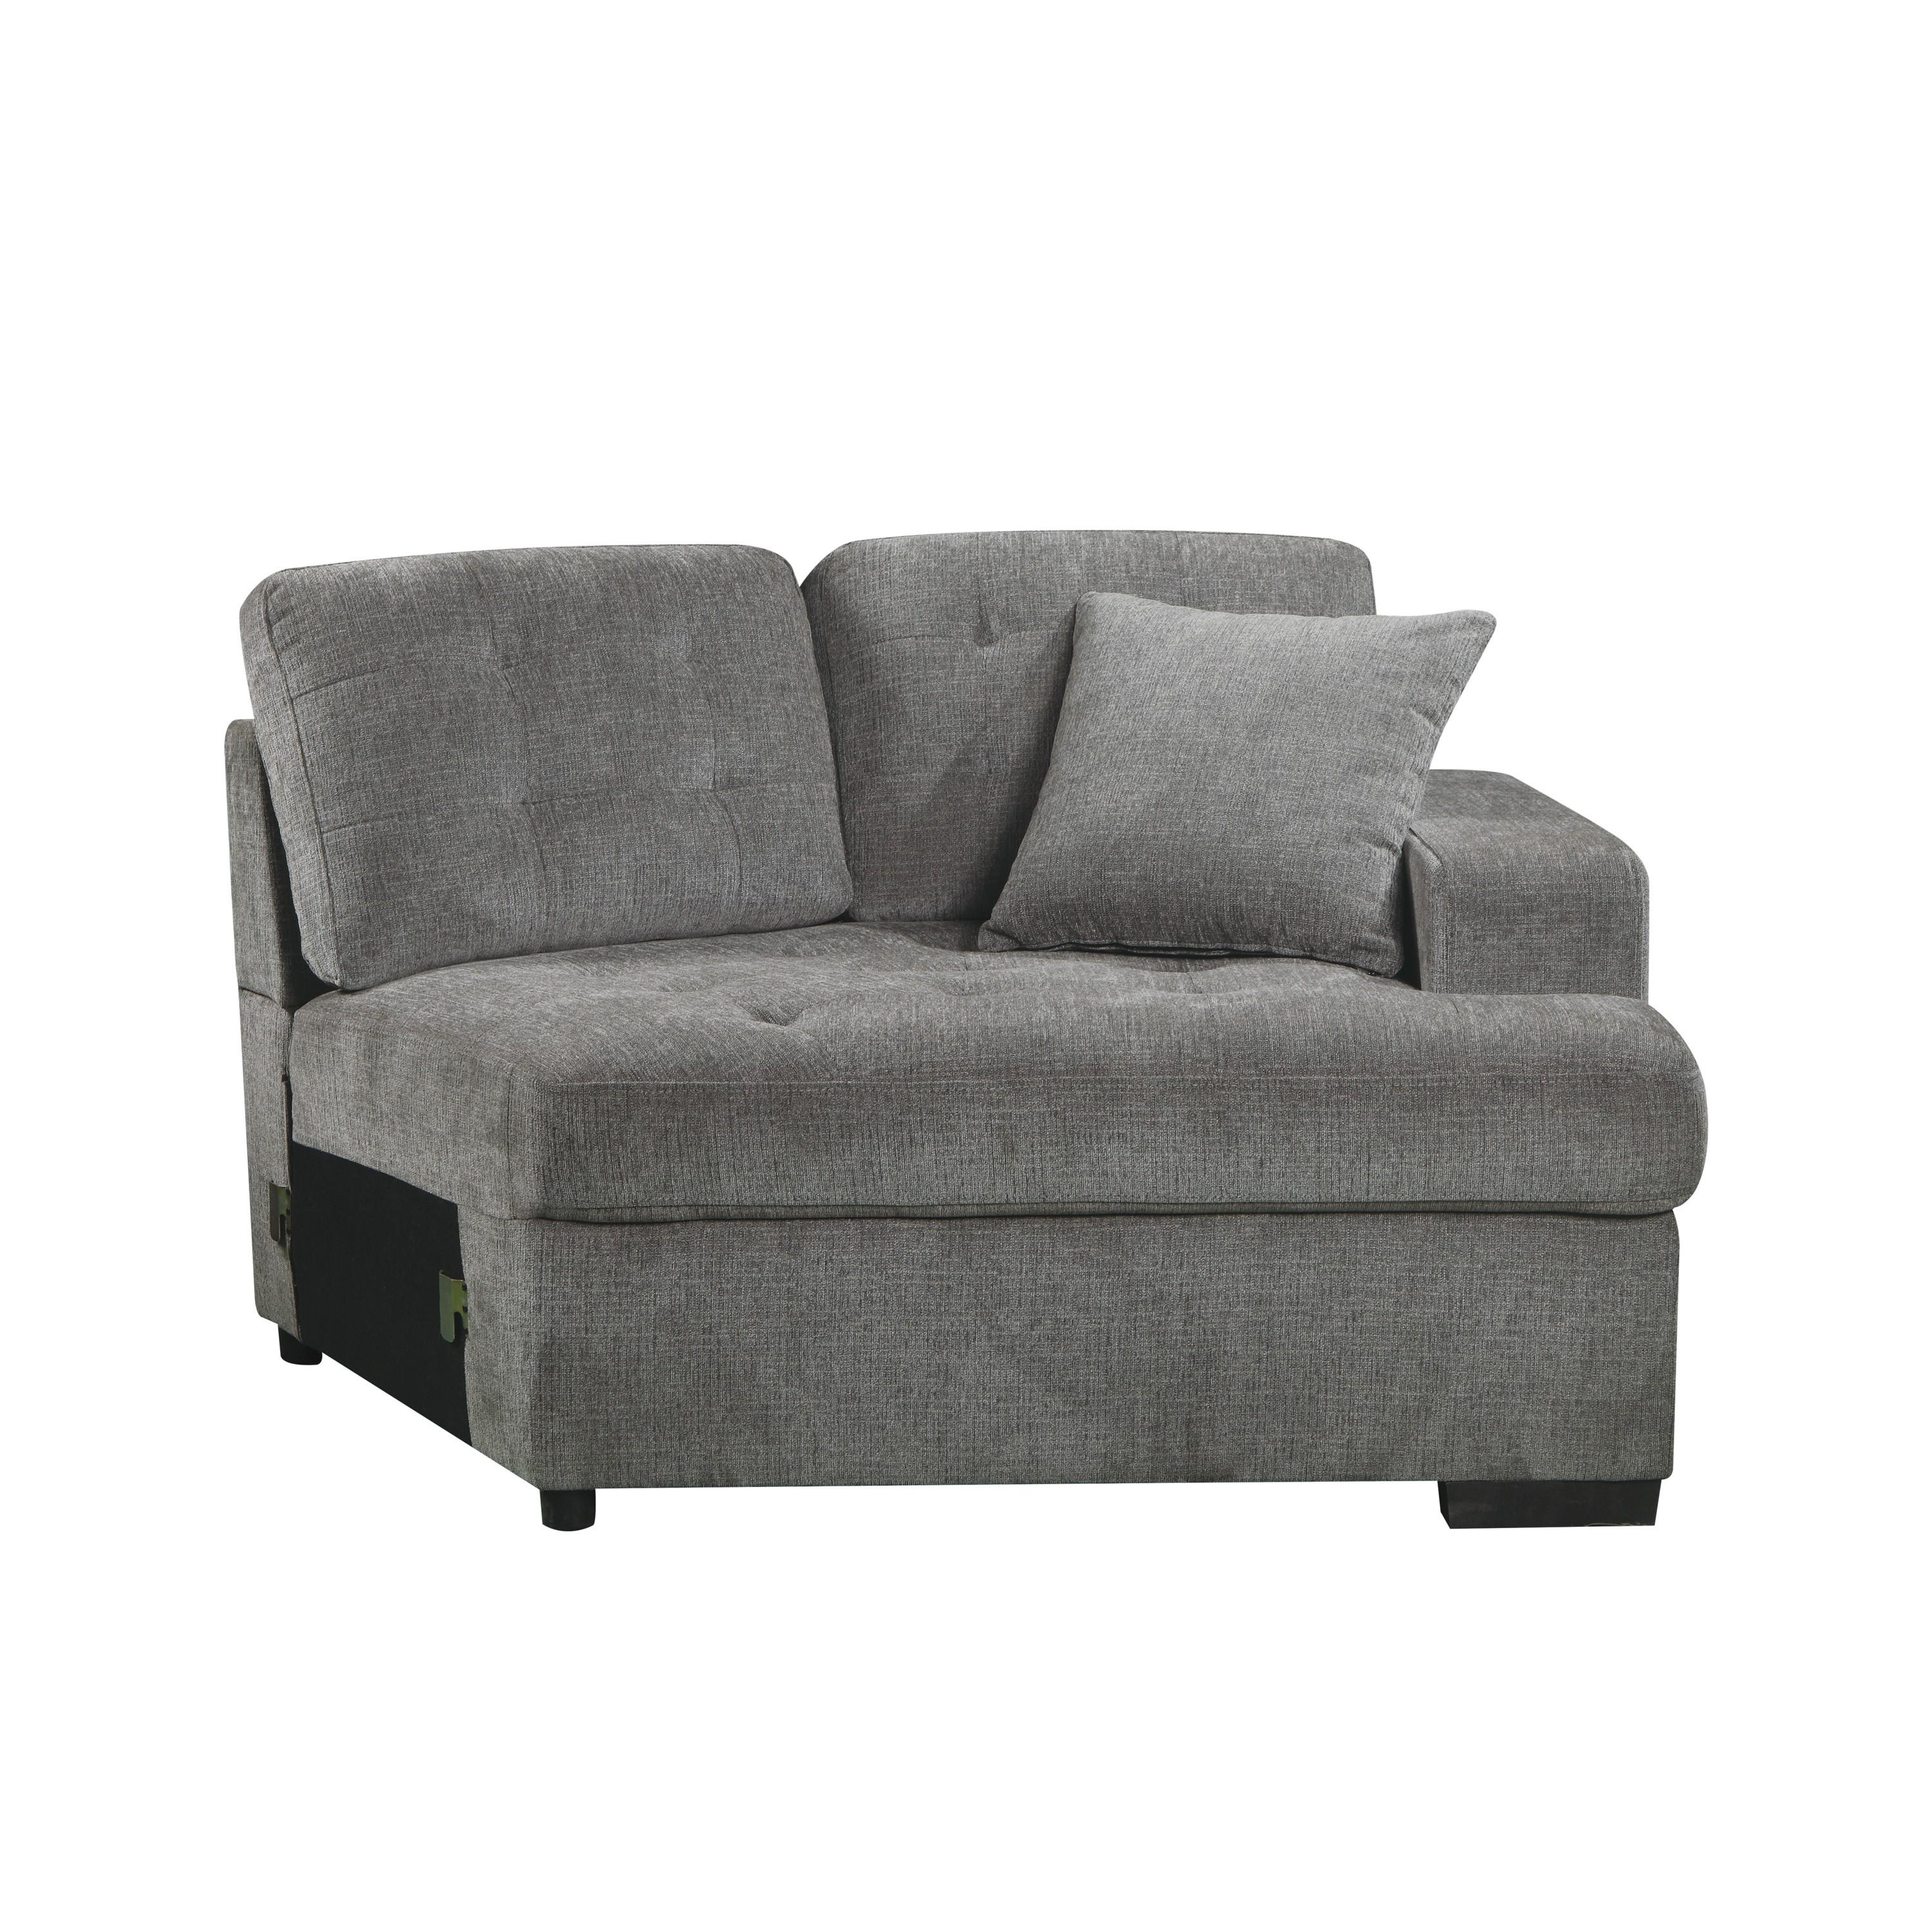 

    
Transitional Gray Chenille 4-Piece Sectional Homelegance 9401GRY*42LRU Logansport
